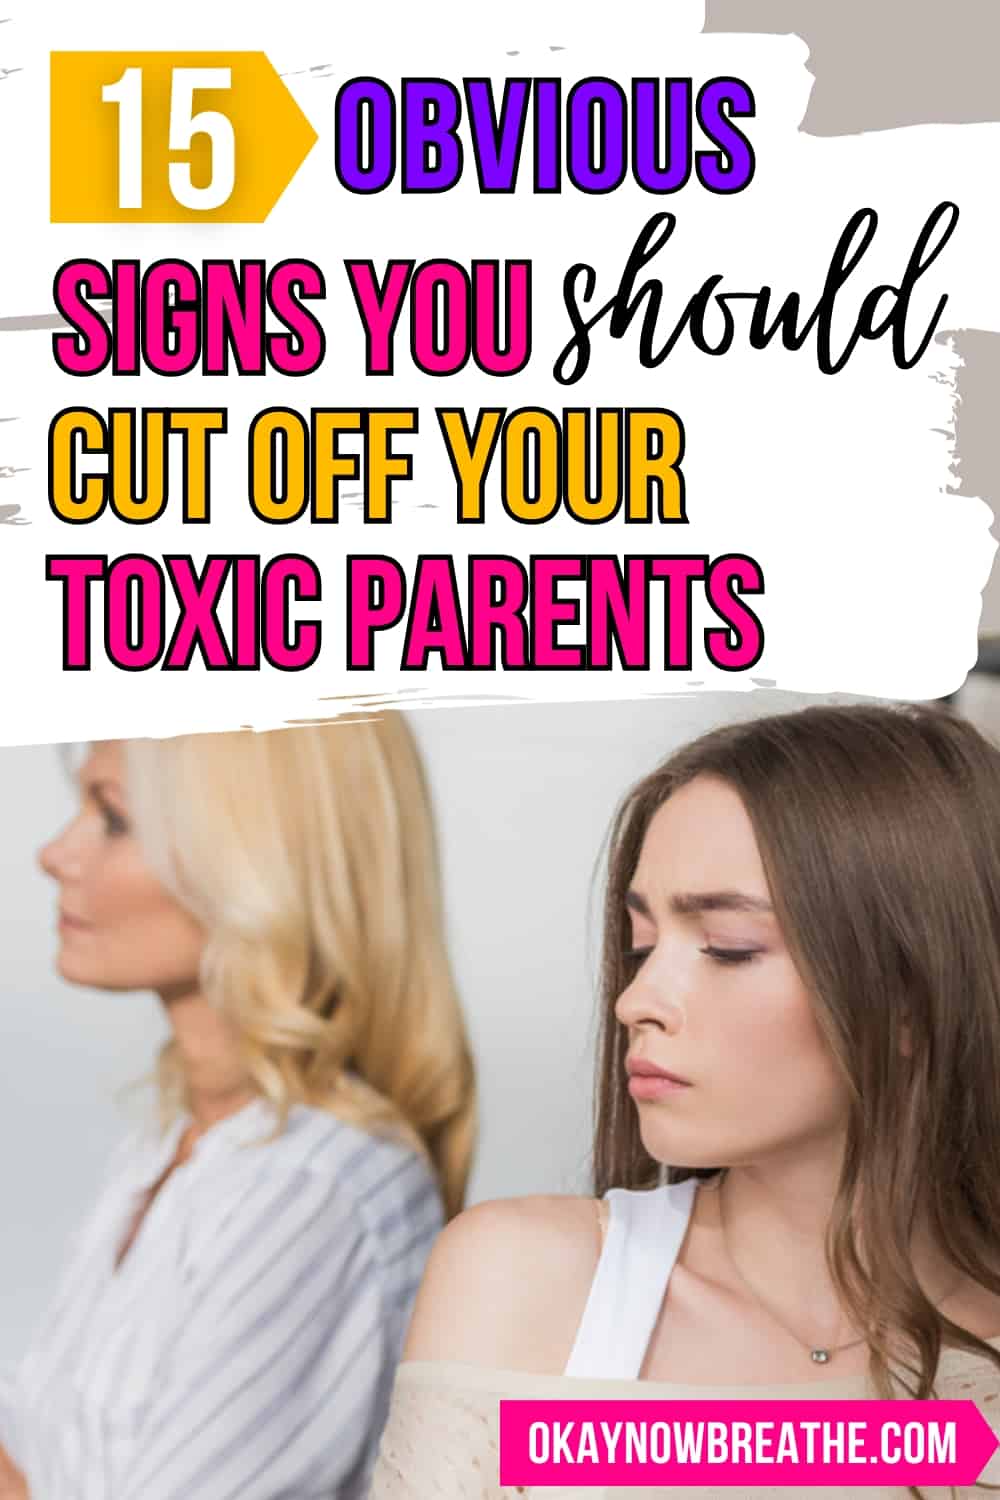 There is a blonde mom and brunette adult child facing away from each other. Above them, there is text: 15 obvious signs you should cut off your toxic parents.